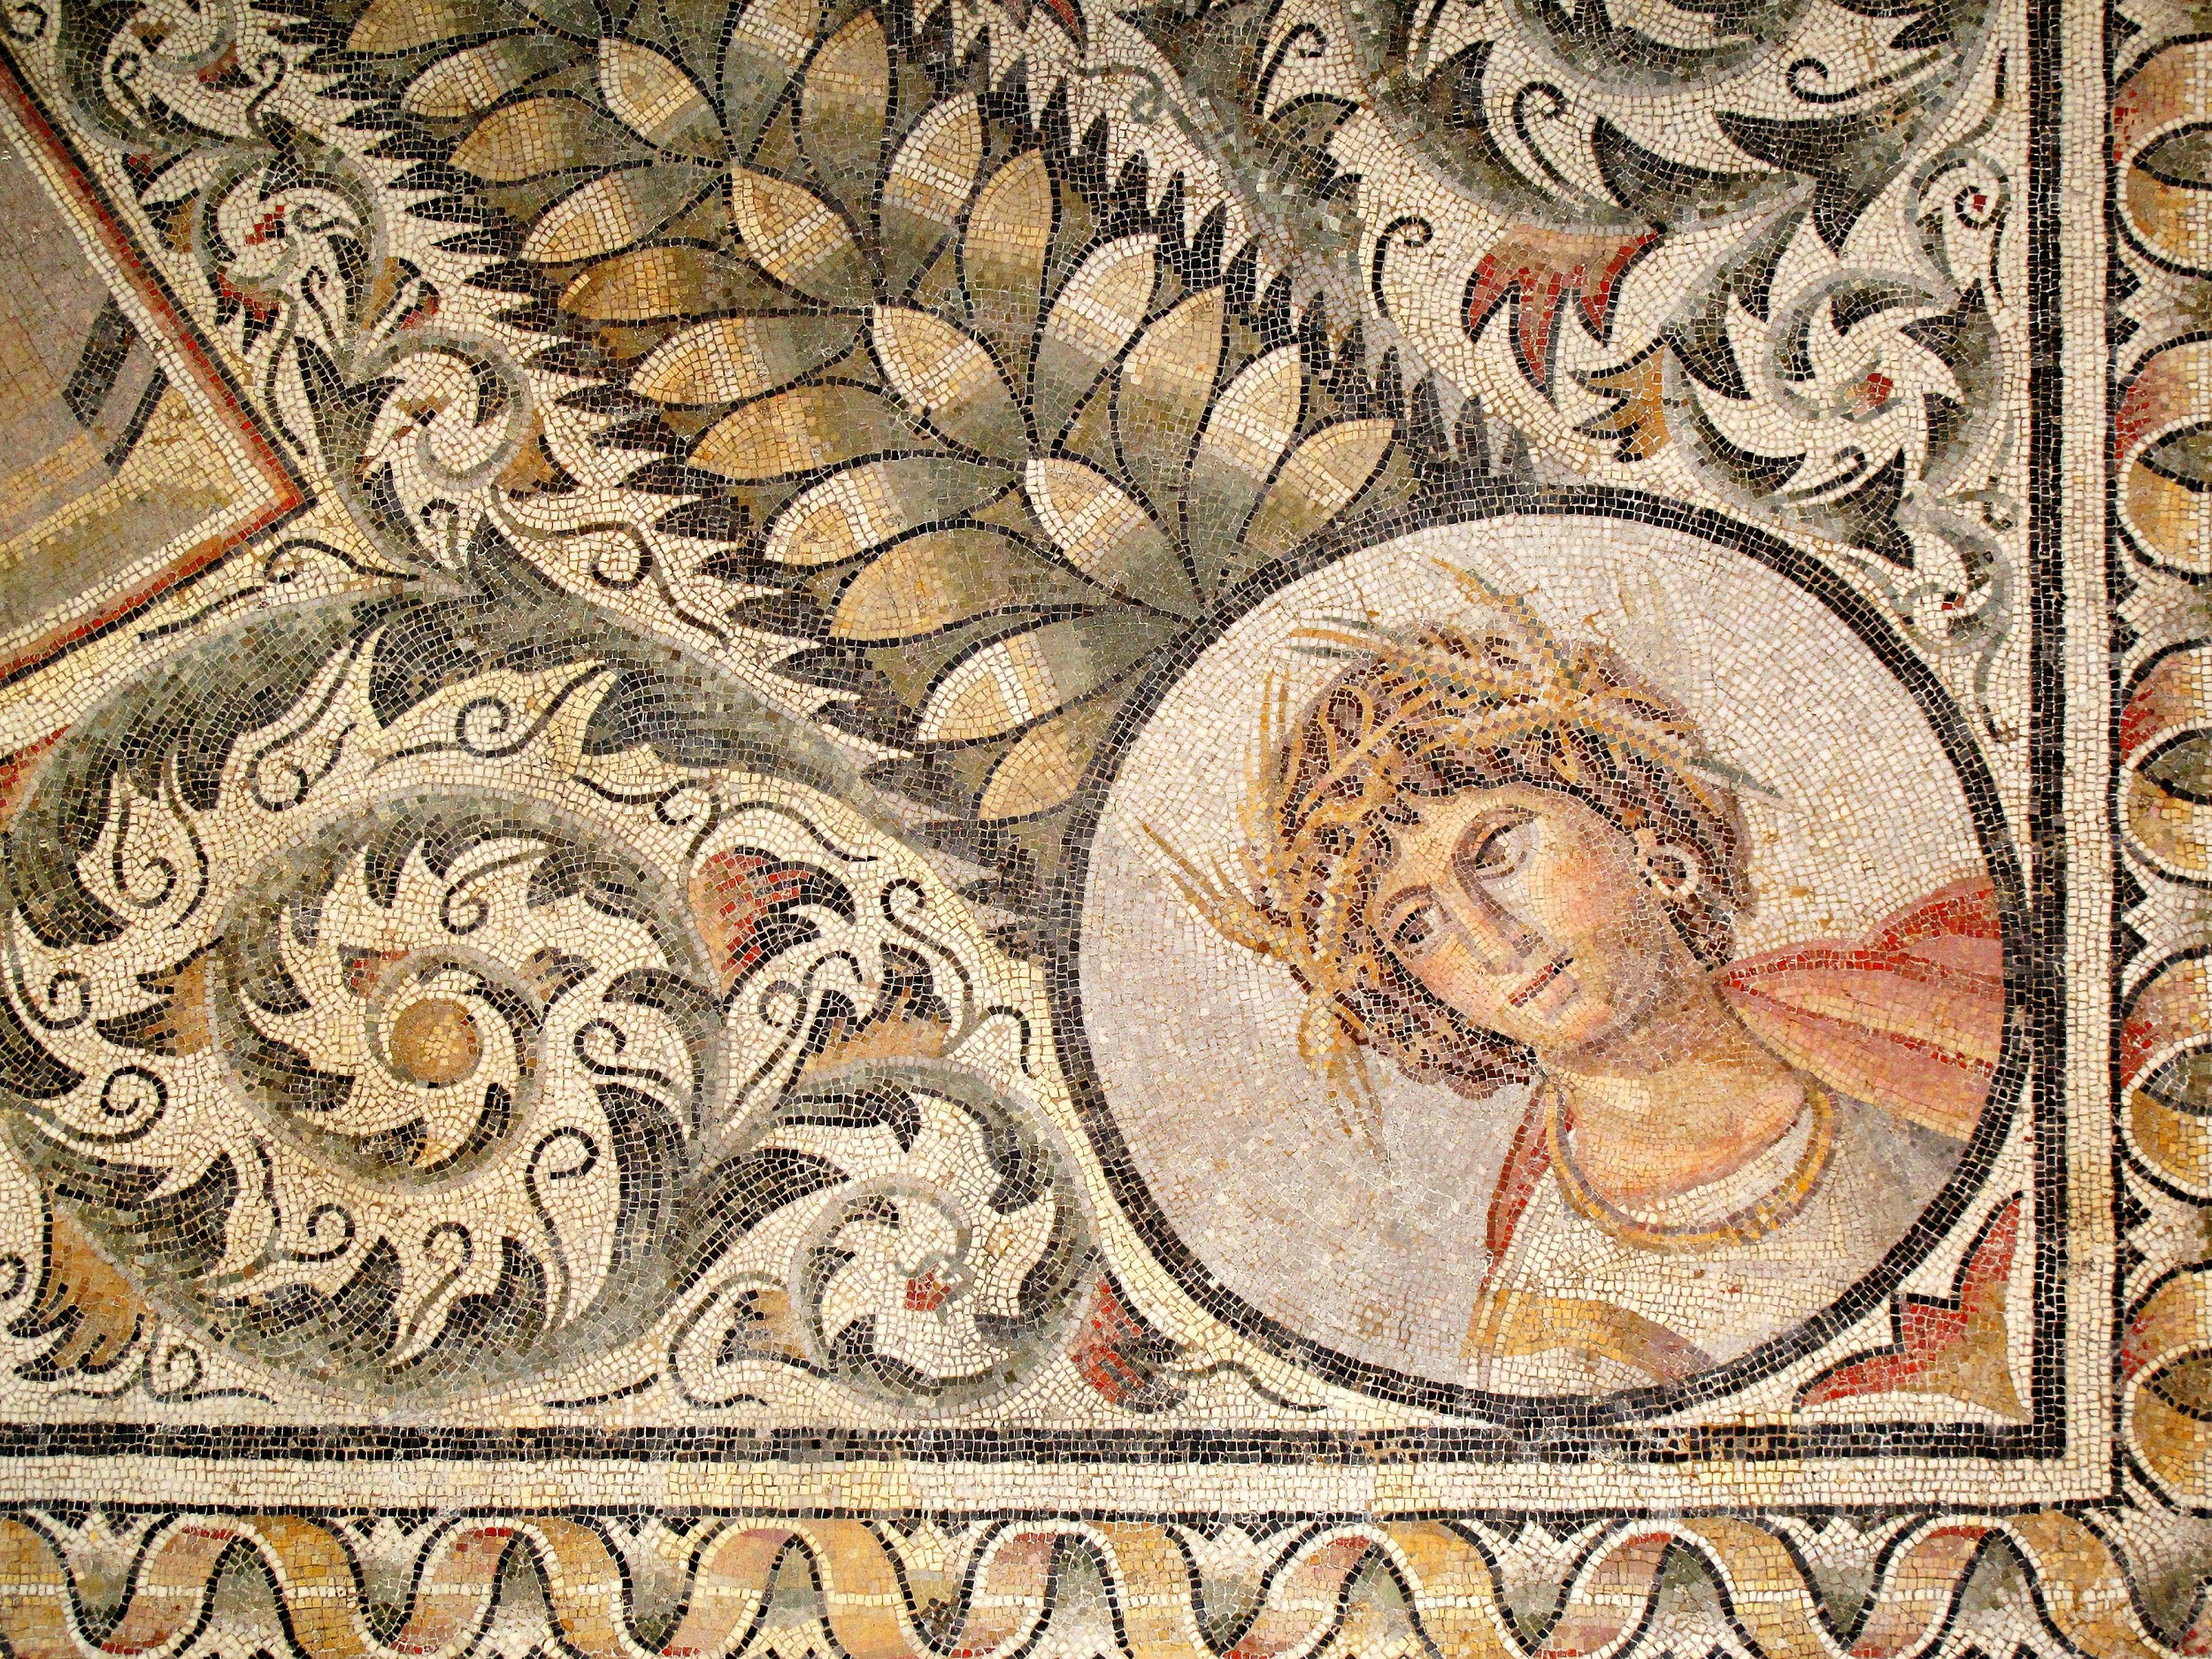 Mosaic of the 4th century from Carthage depicting July from a corner section of a months and seasons pavement, with a medallion of summer wreathed with ears of corn.